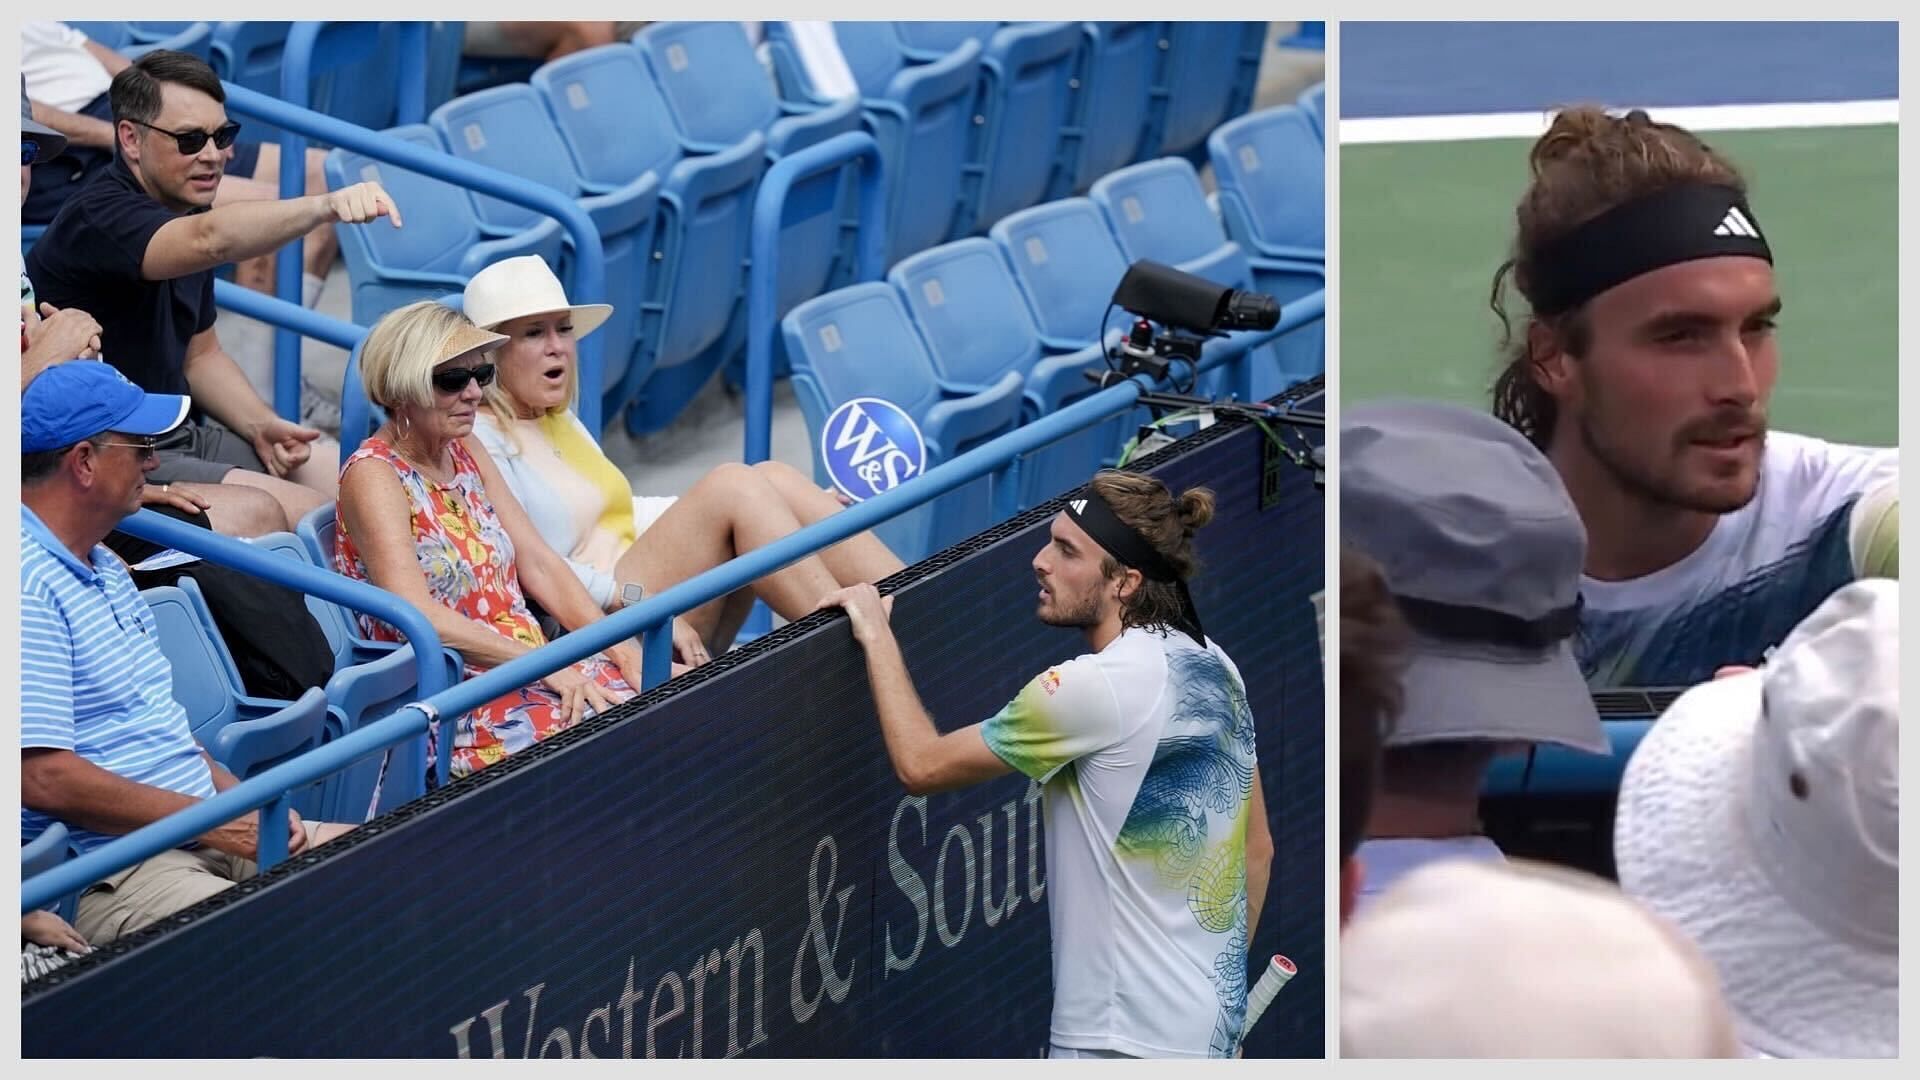 Stefanos Tsitsipas distracted by a spectator at the Cincinnati Open